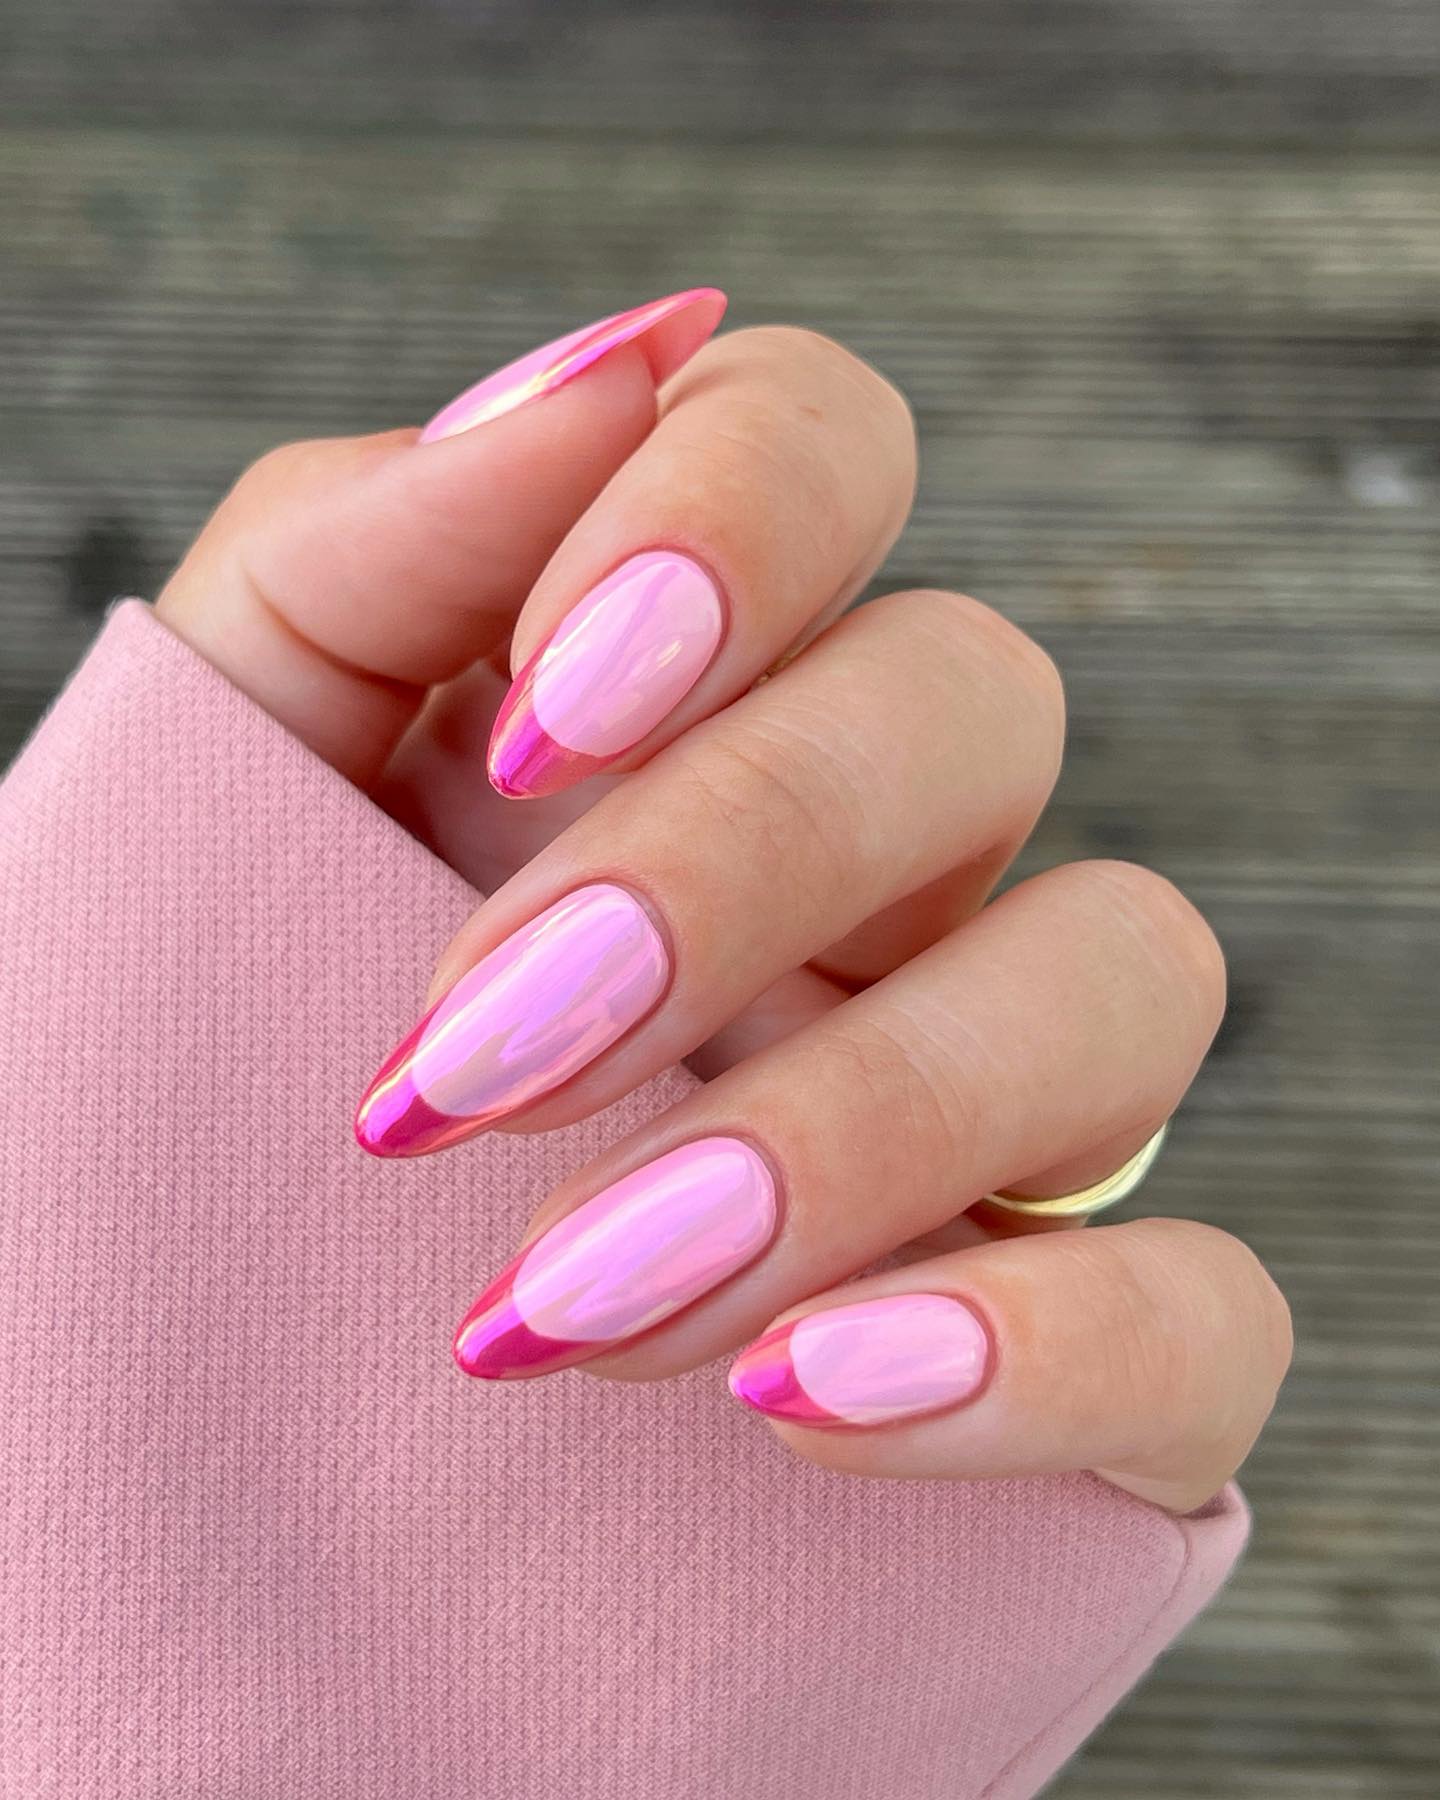 Chrome Nails with light pink base and hot pink tips